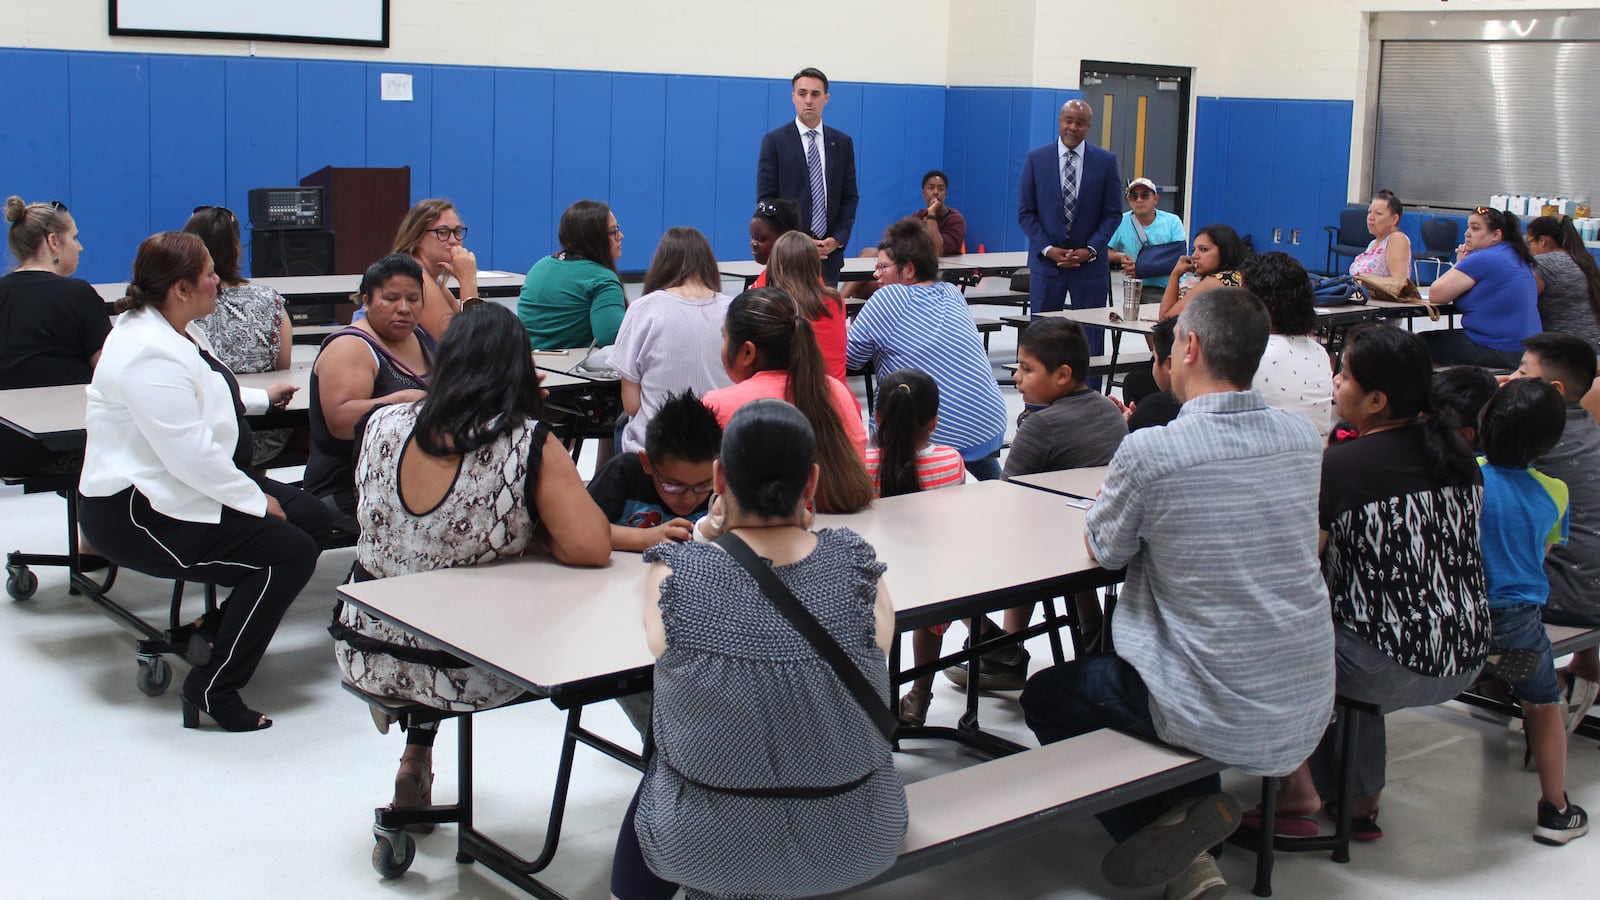 Rob Kimball, of Grand Valley State University (back left), and Ralph Bland, of New Paradigm for Education (back right), told parents that they hoped to be ready to start a new school by August 1.